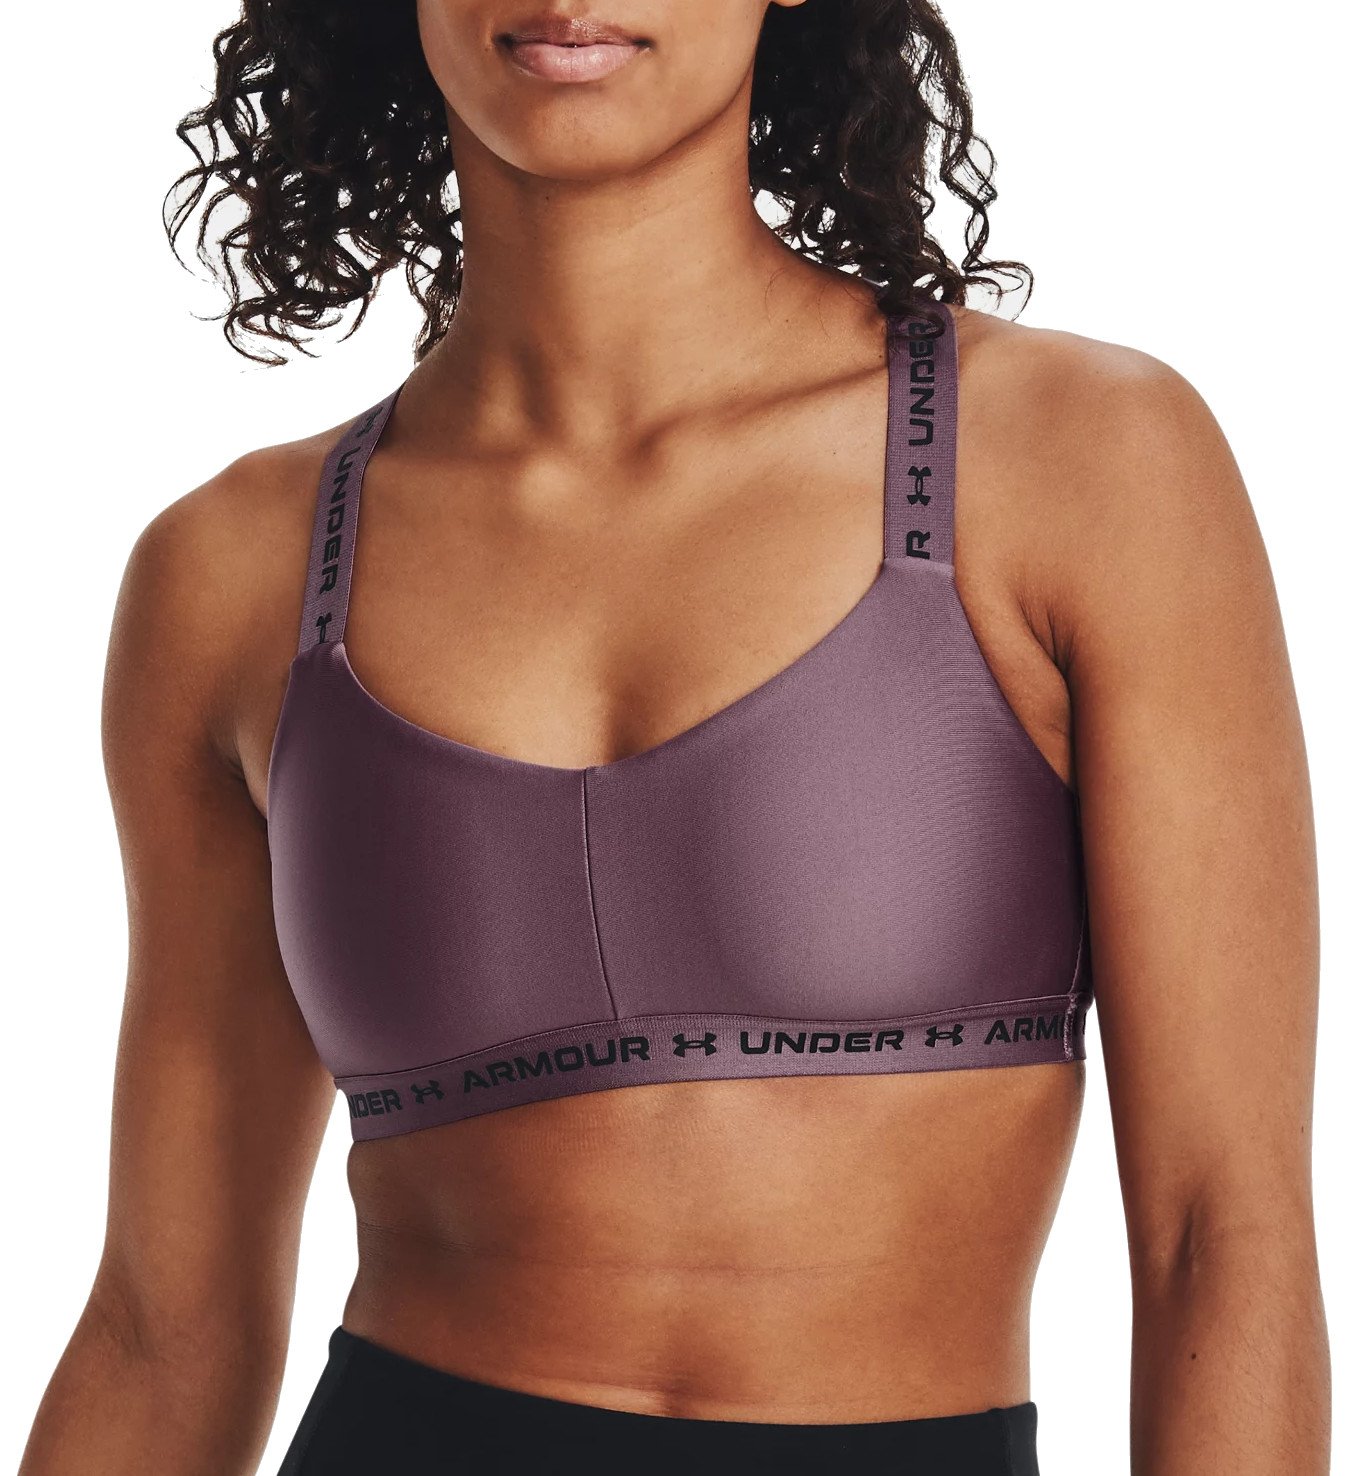 Women's bra adidas Don't Rest Badge of Sport - Bras - The Heights